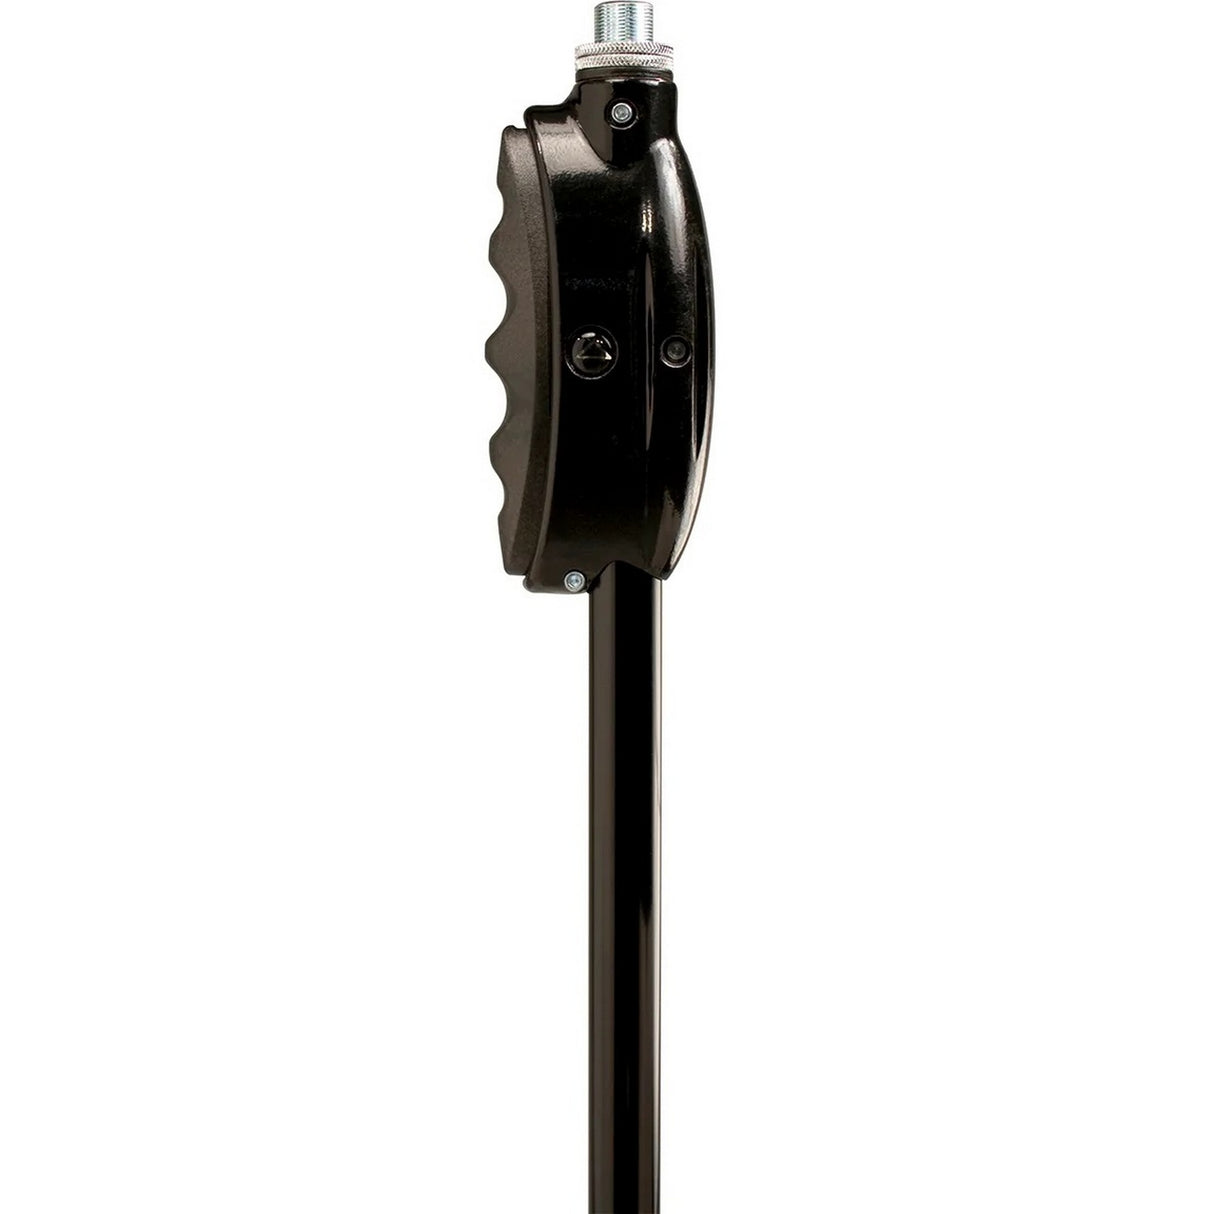 Ultimate Support LIVE-T Live Series Microphone Stand with Tripod Locking Legs